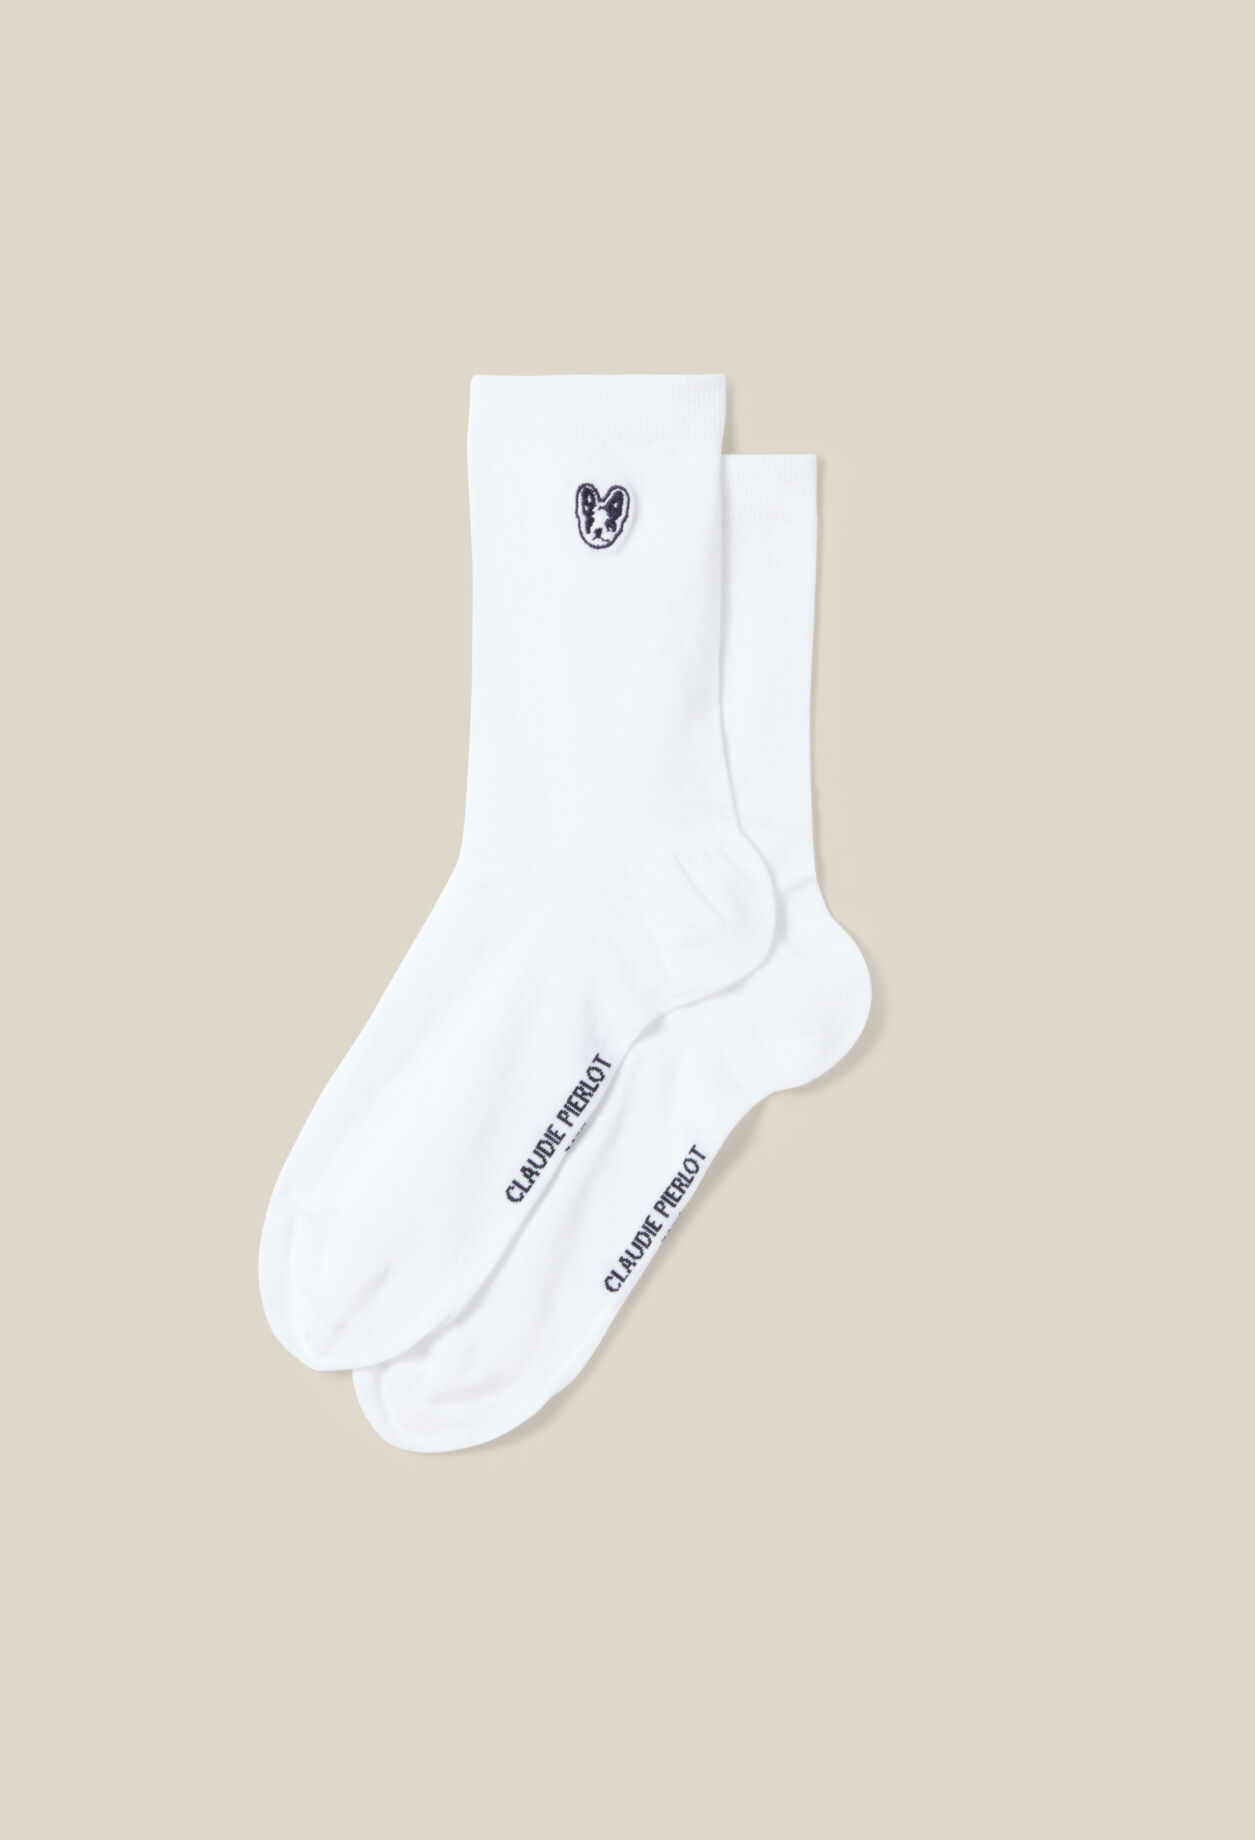 Chaussettes Jean Toto blanches